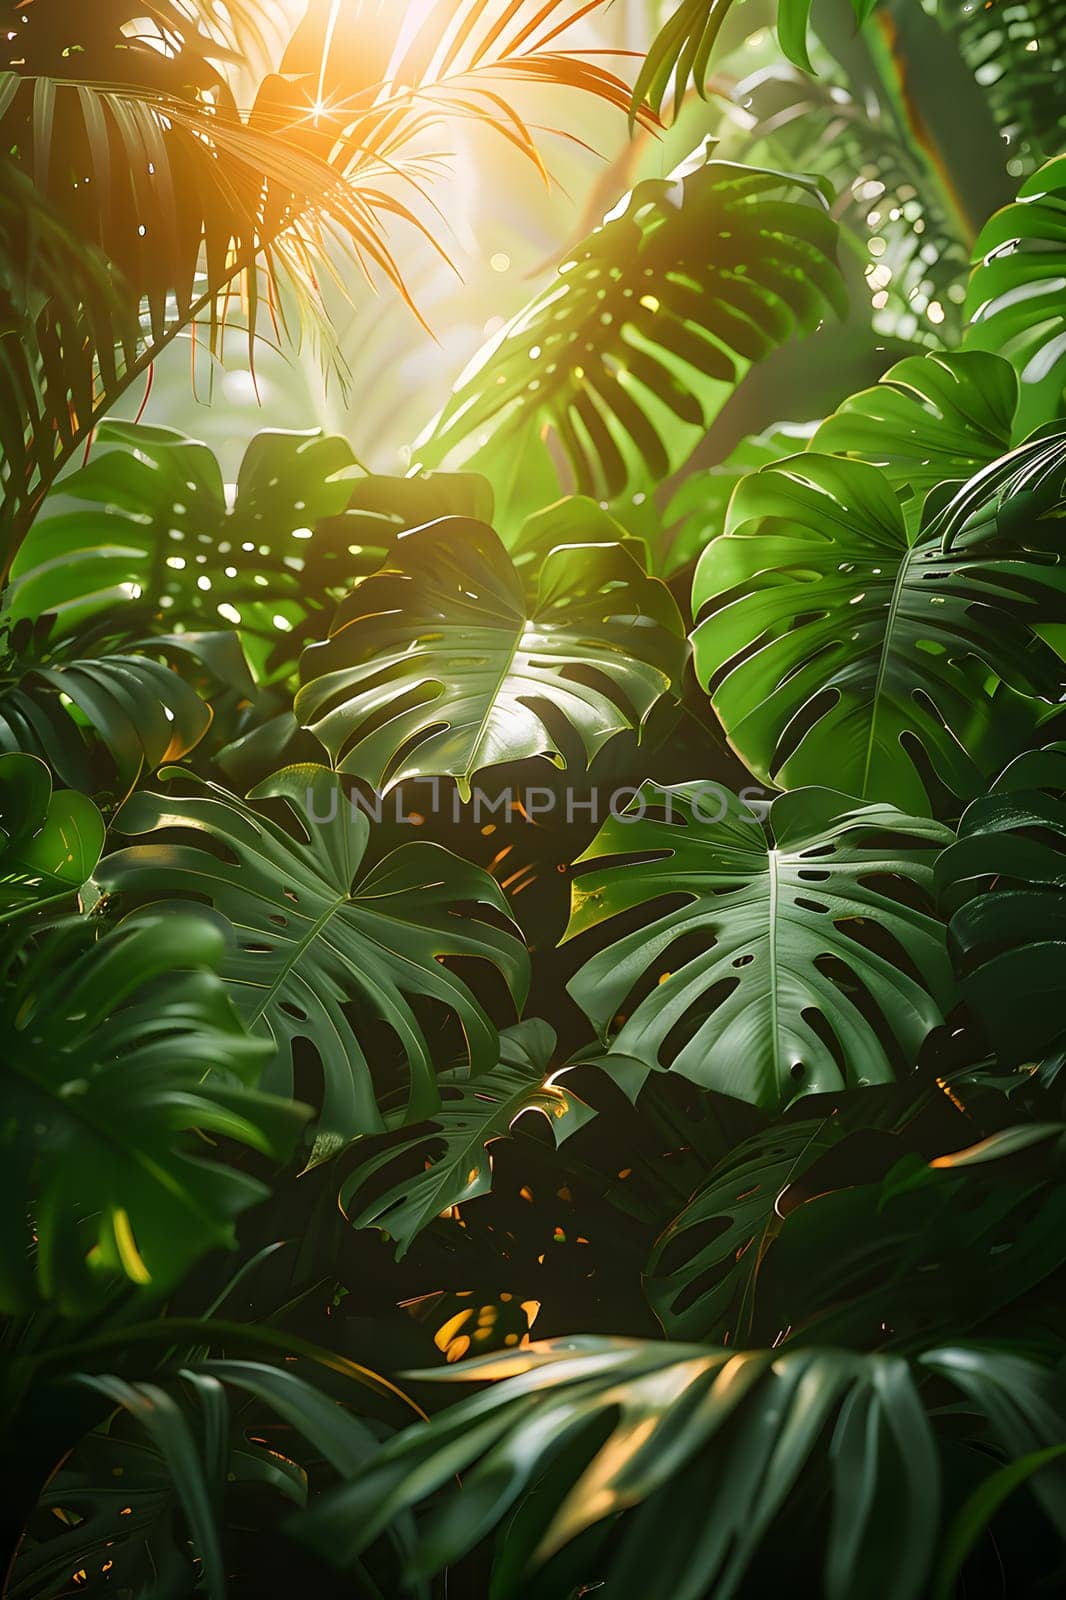 The sunlight filters through the foliage of a lush tropical jungle, illuminating the diverse terrestrial plants and organisms in the dense landscape